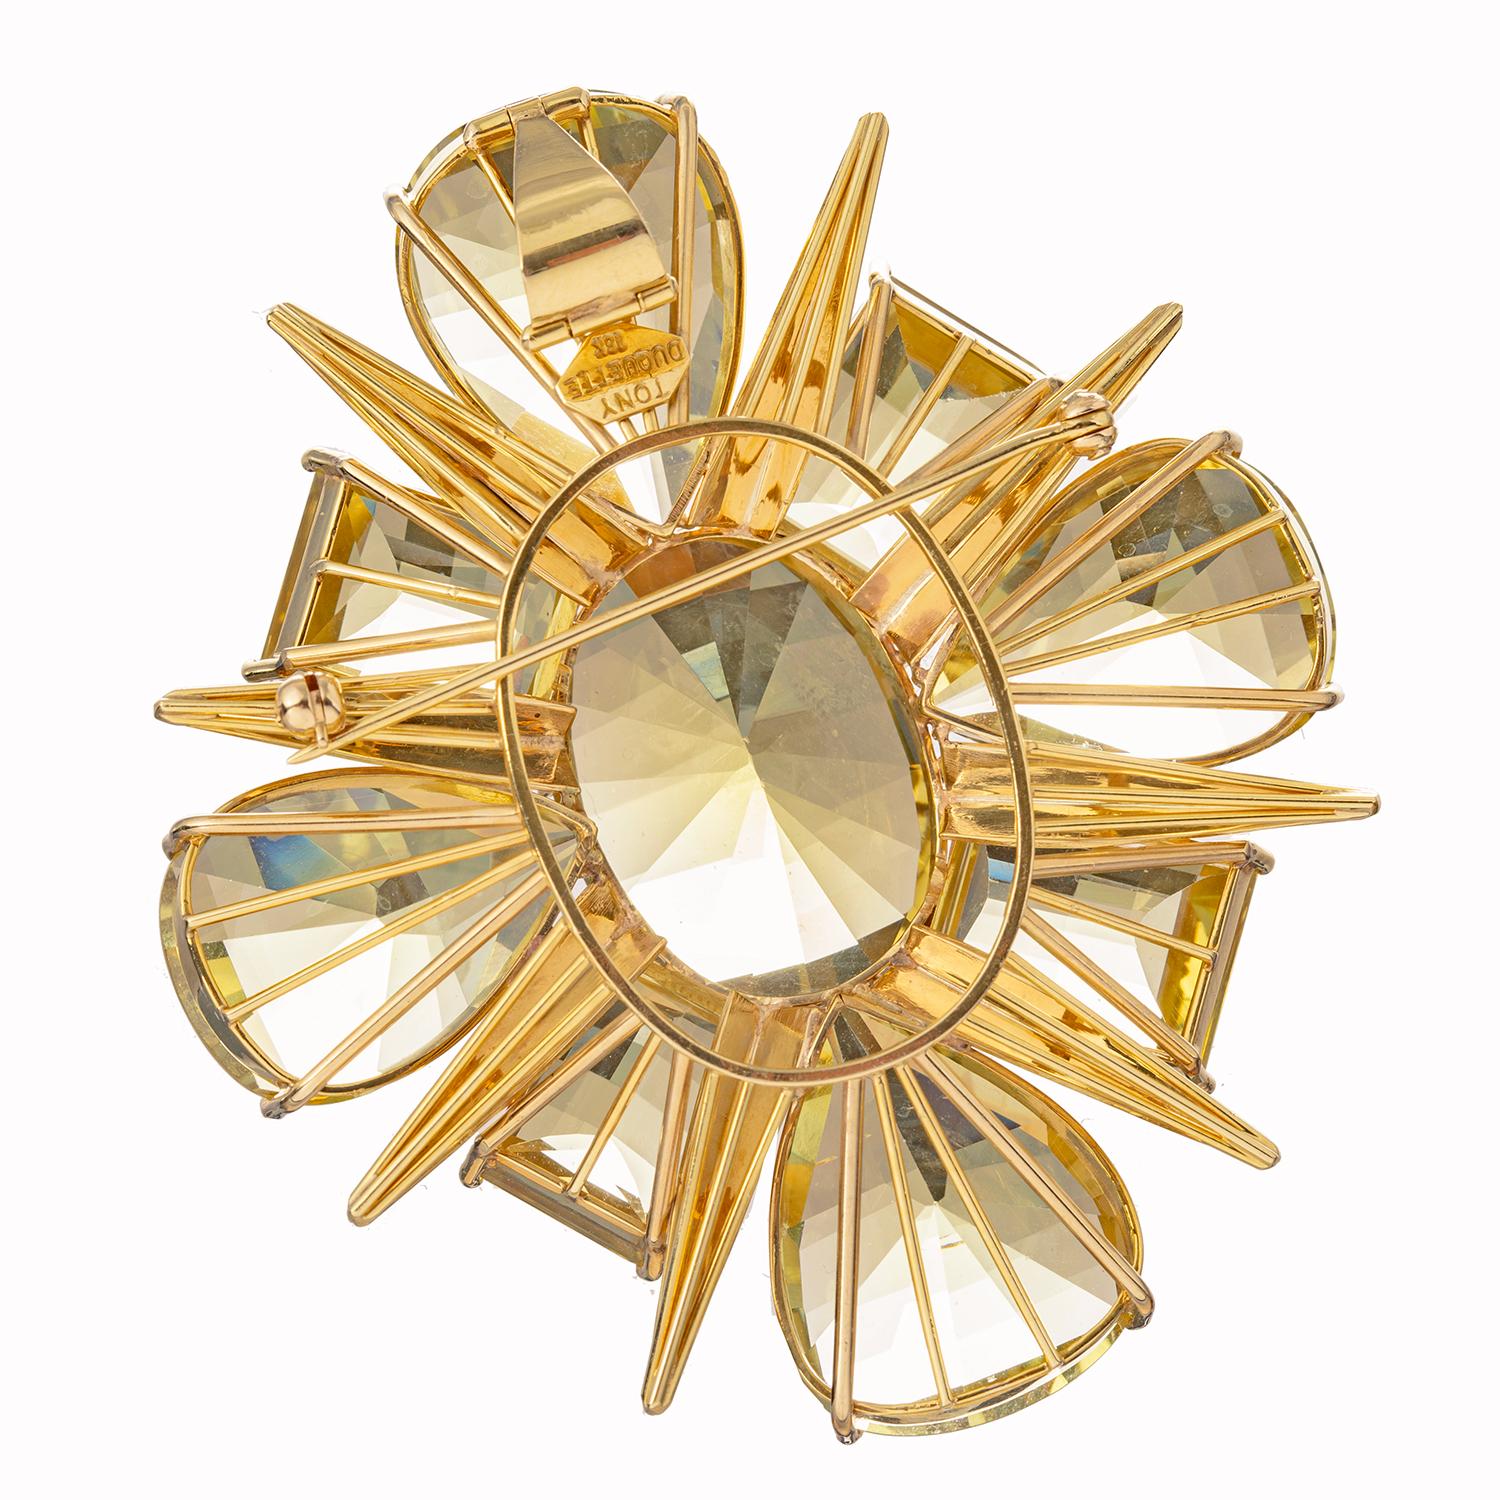 Citrine starburst pendant brooch, featuring pear, oval and square-shaped citrine set in 18k yellow gold.  Hinged fold down pendant loop at top, as well as pin stem, on underside.  Signed 'TONY DUQUETTE 18K'.  Dimensions: 3.1